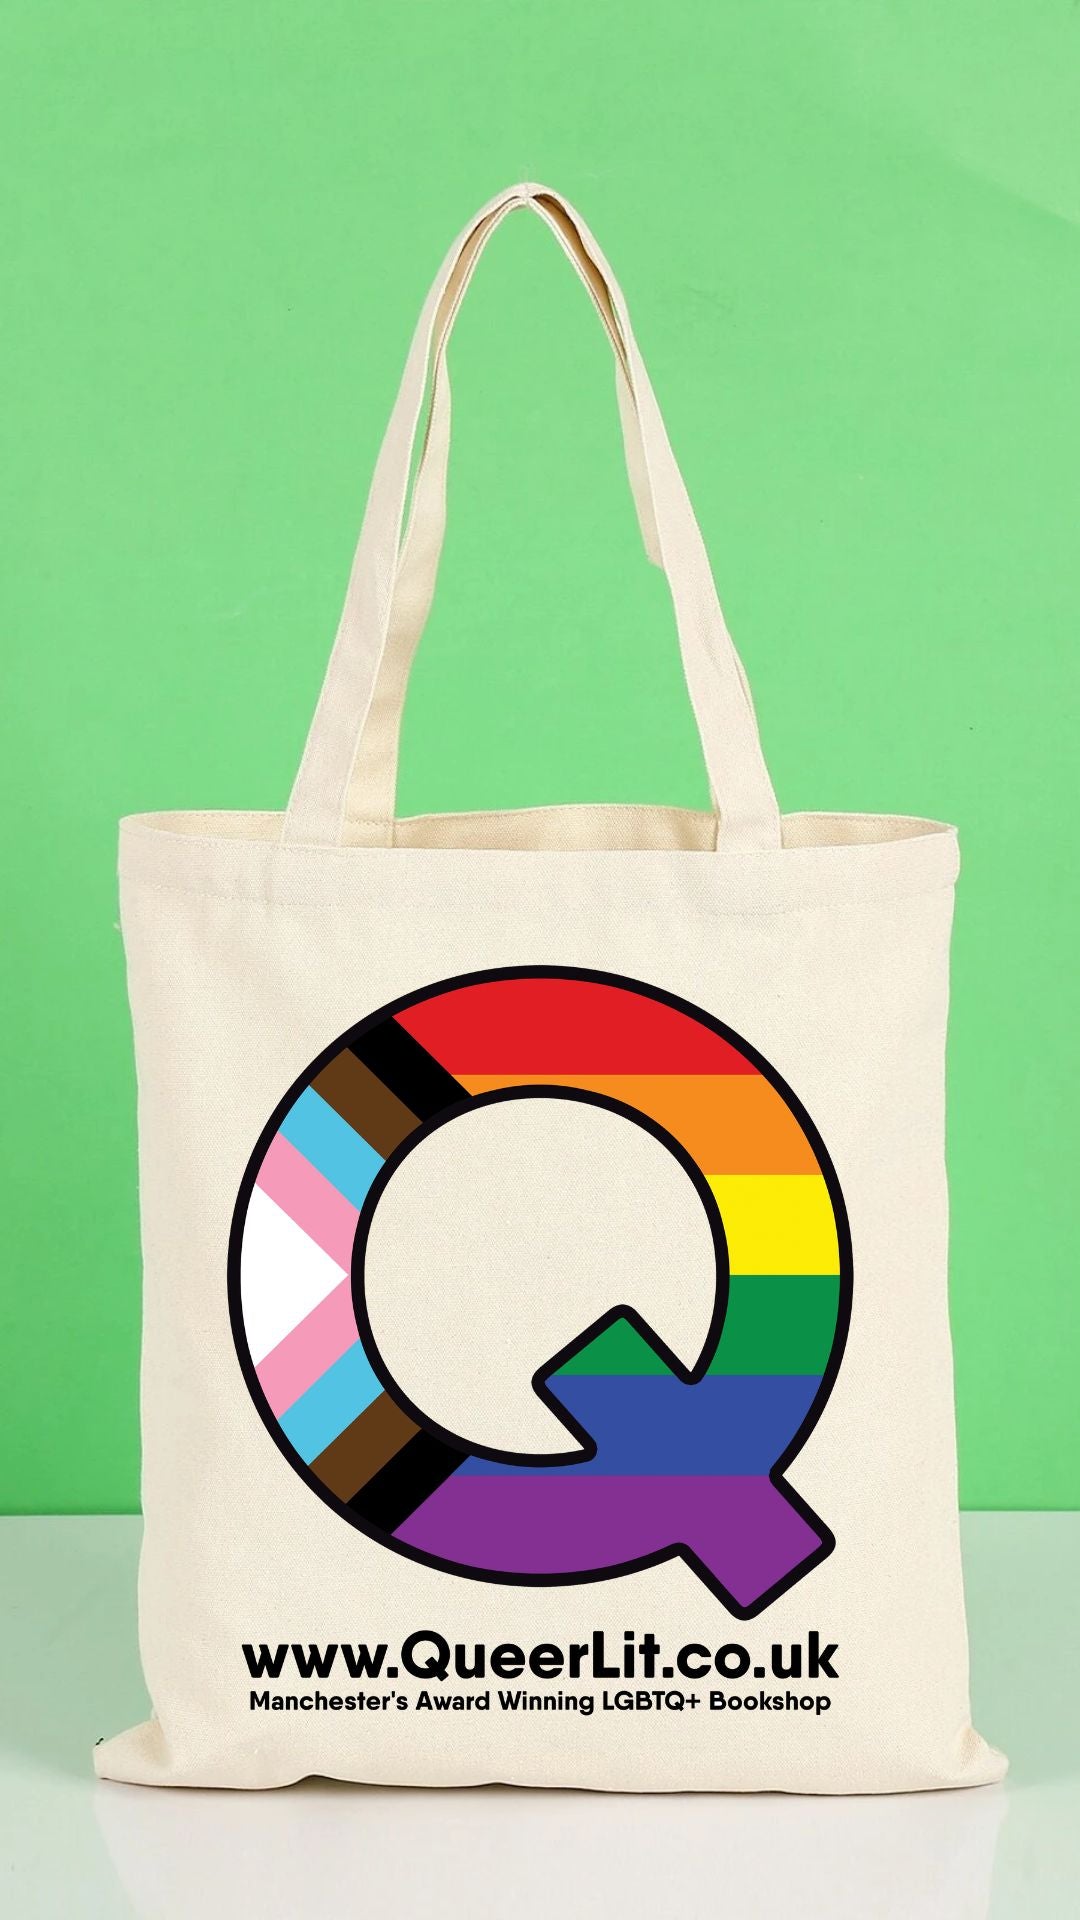 The Big Queer Tote Bag